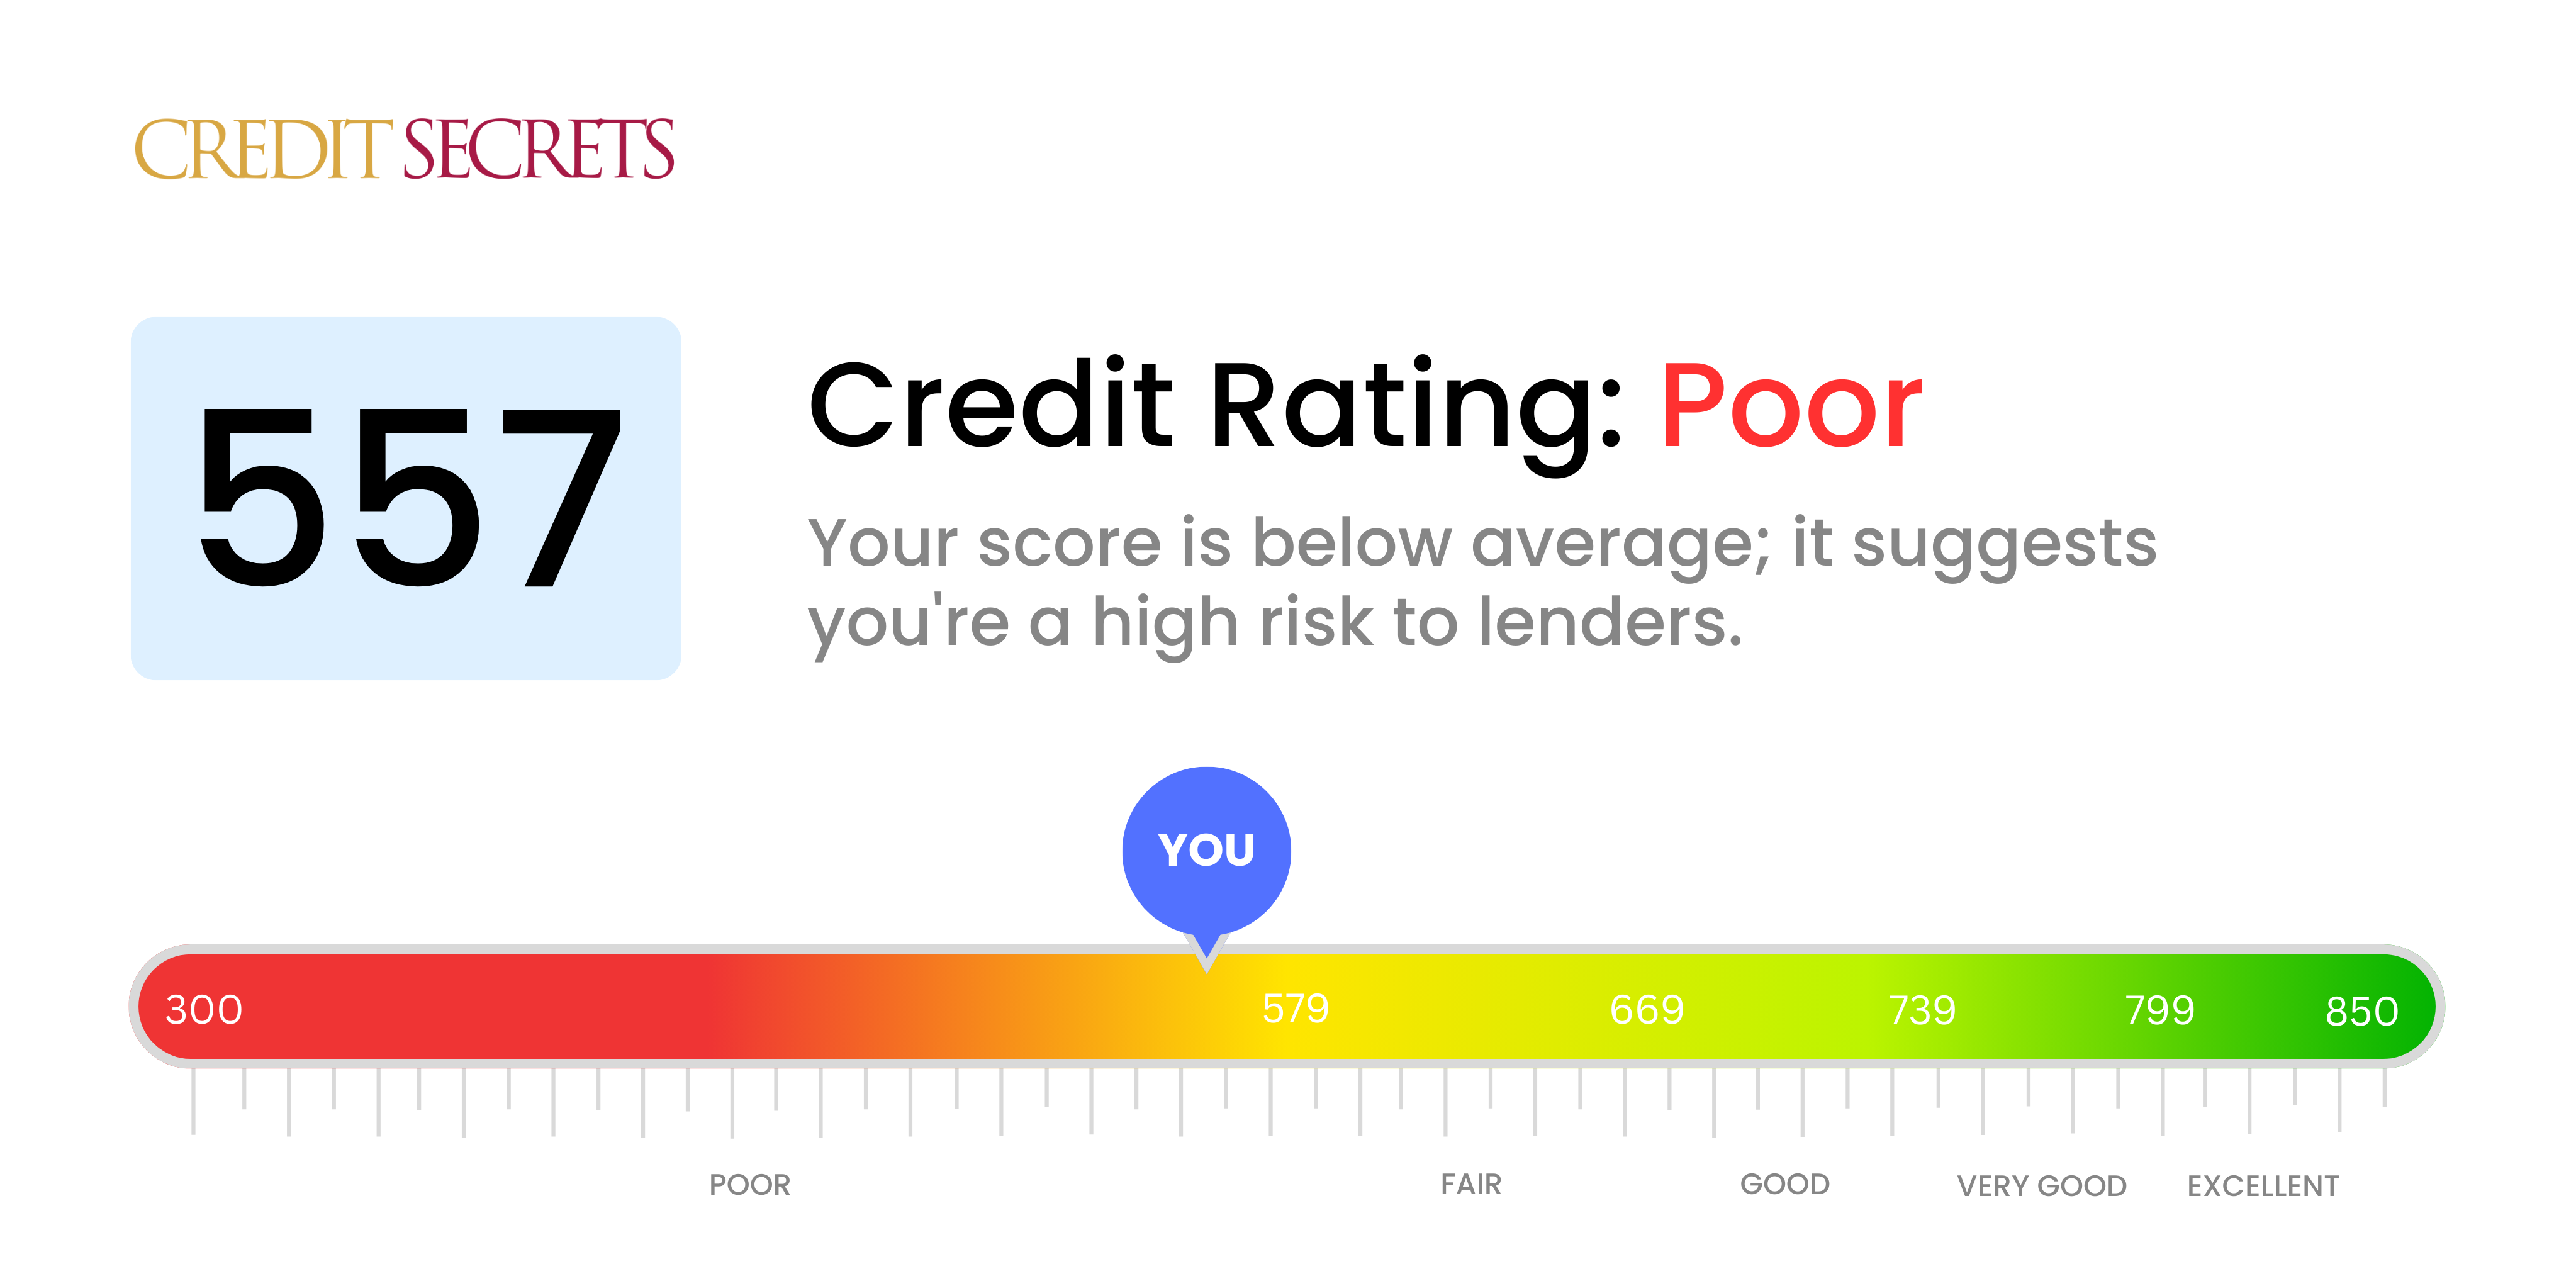 Is 557 a good credit score?